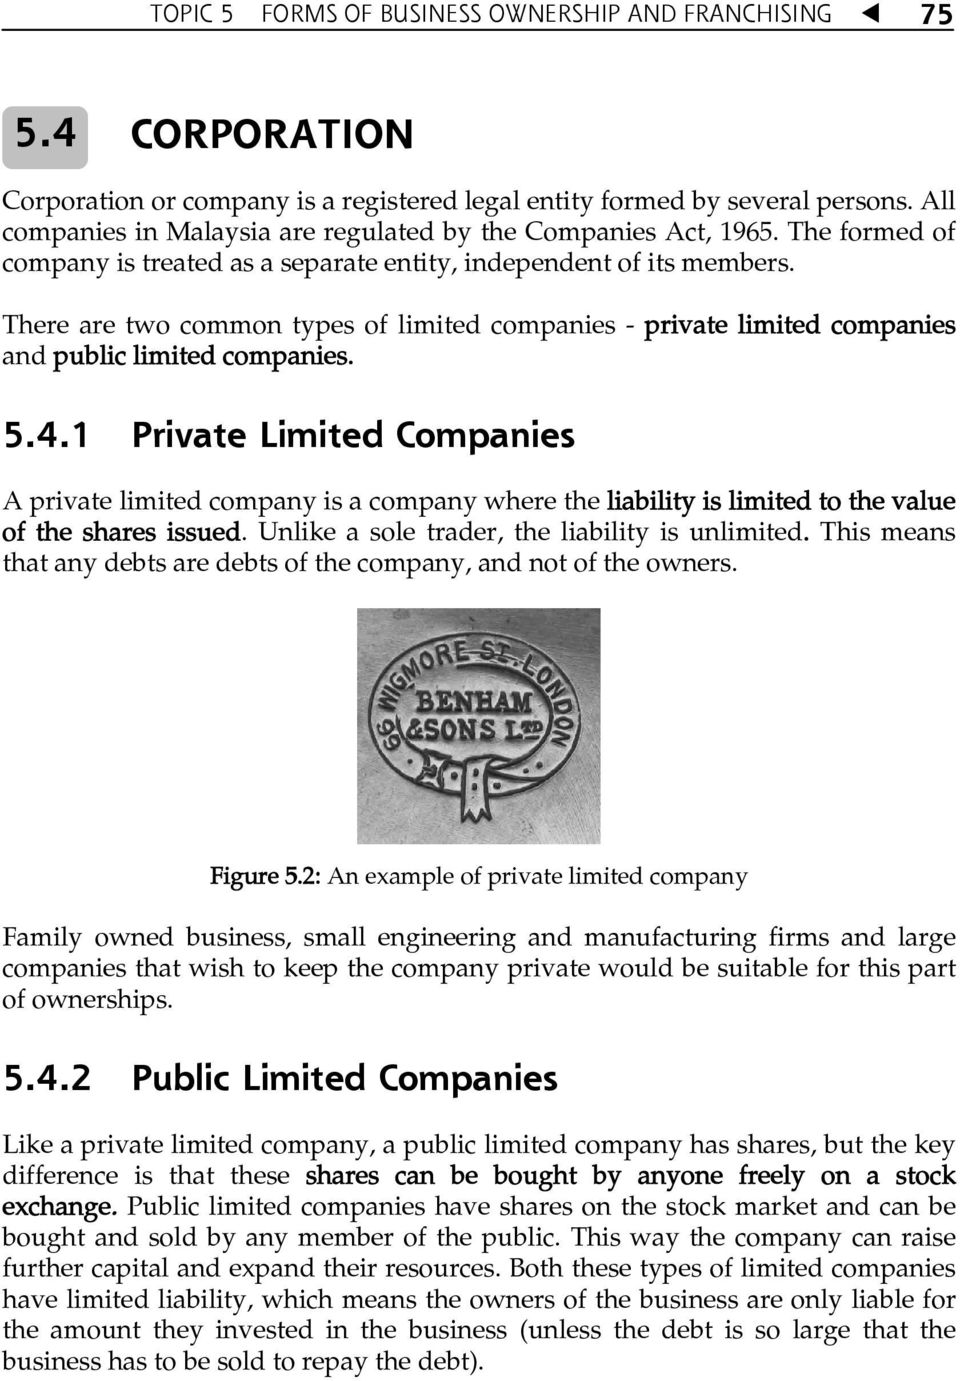 There are two common types of limited companies - private limited companies and public limited companies. 5.4.